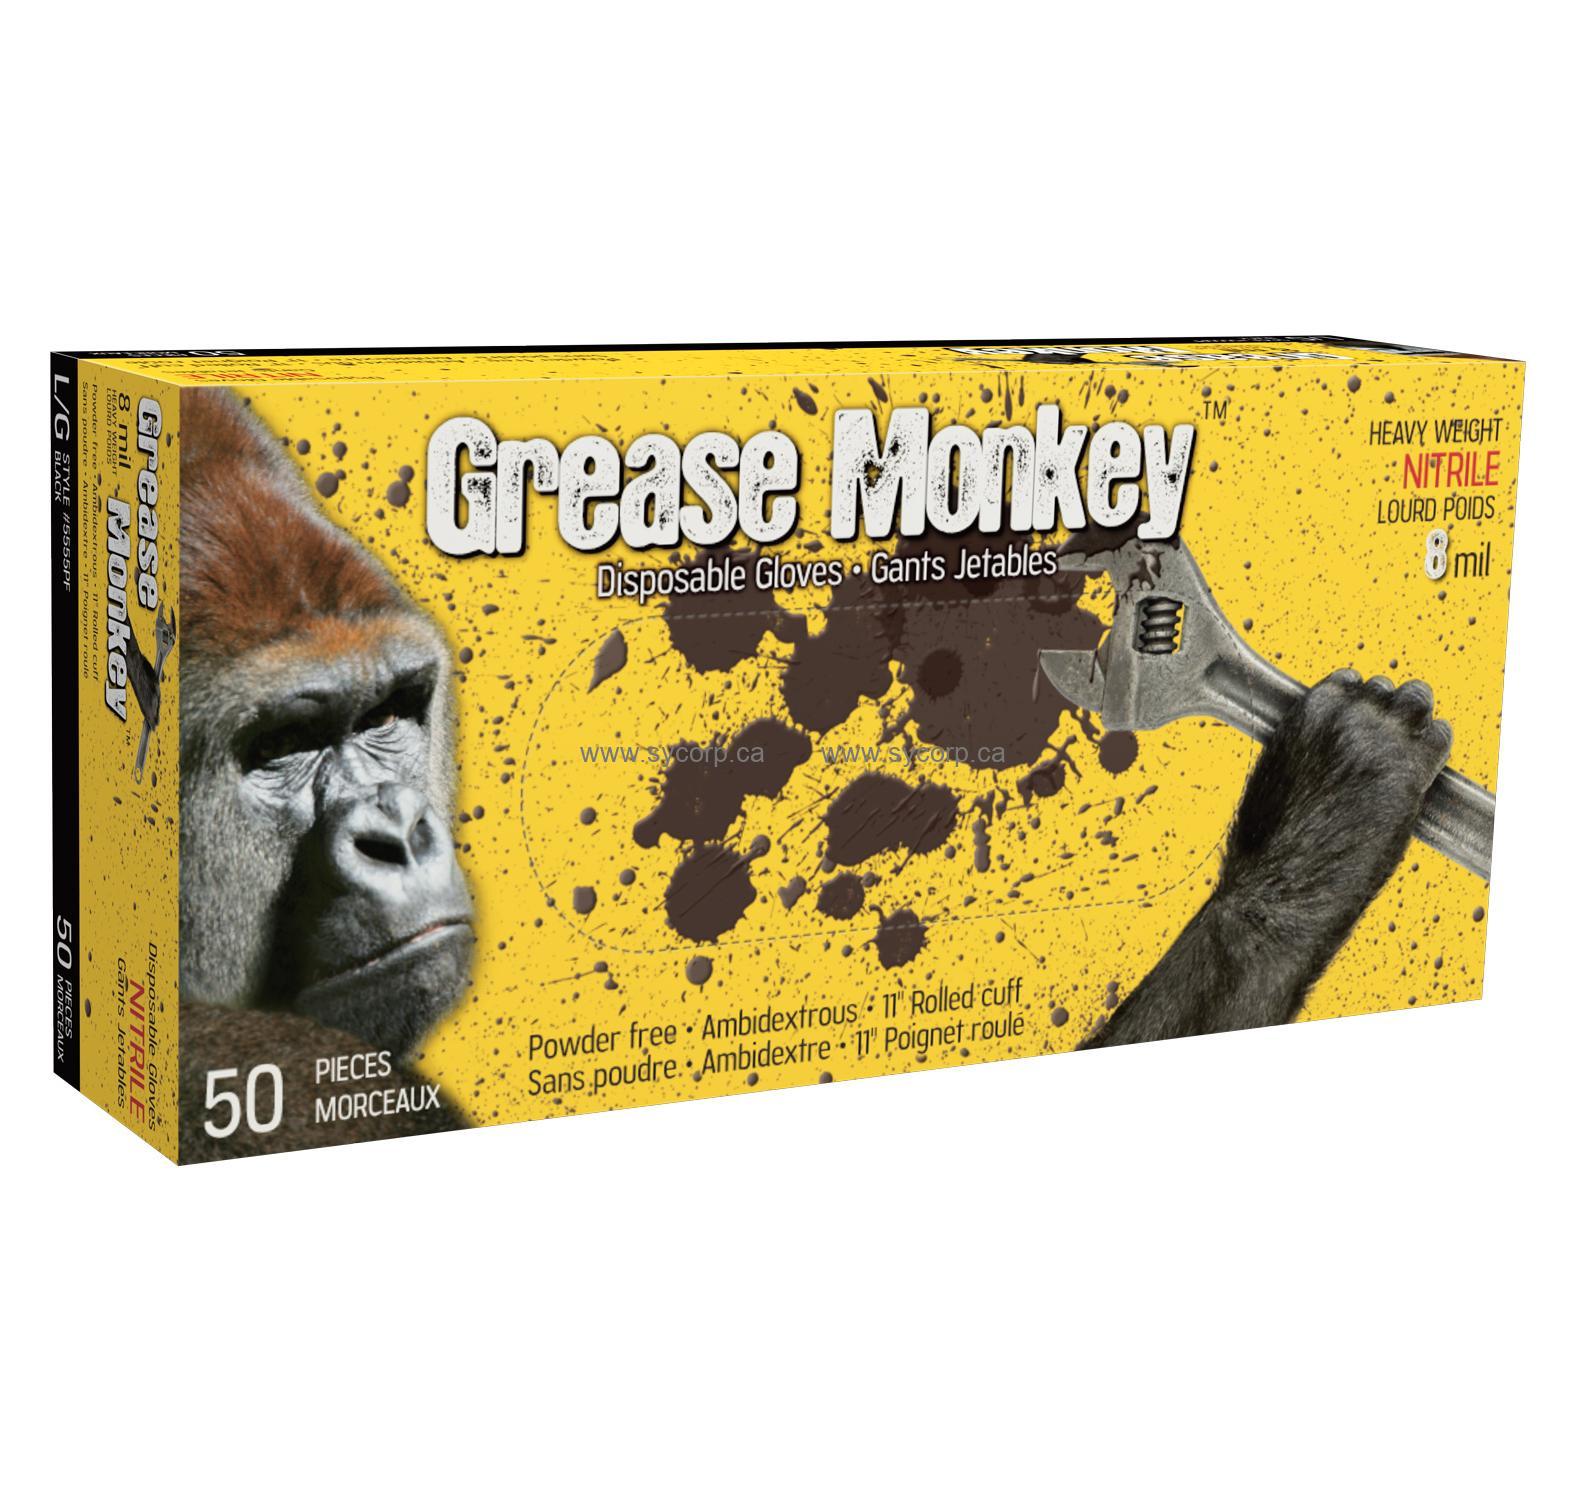 Grease Monkey Disposable Nitrile Gloves - 50/BX